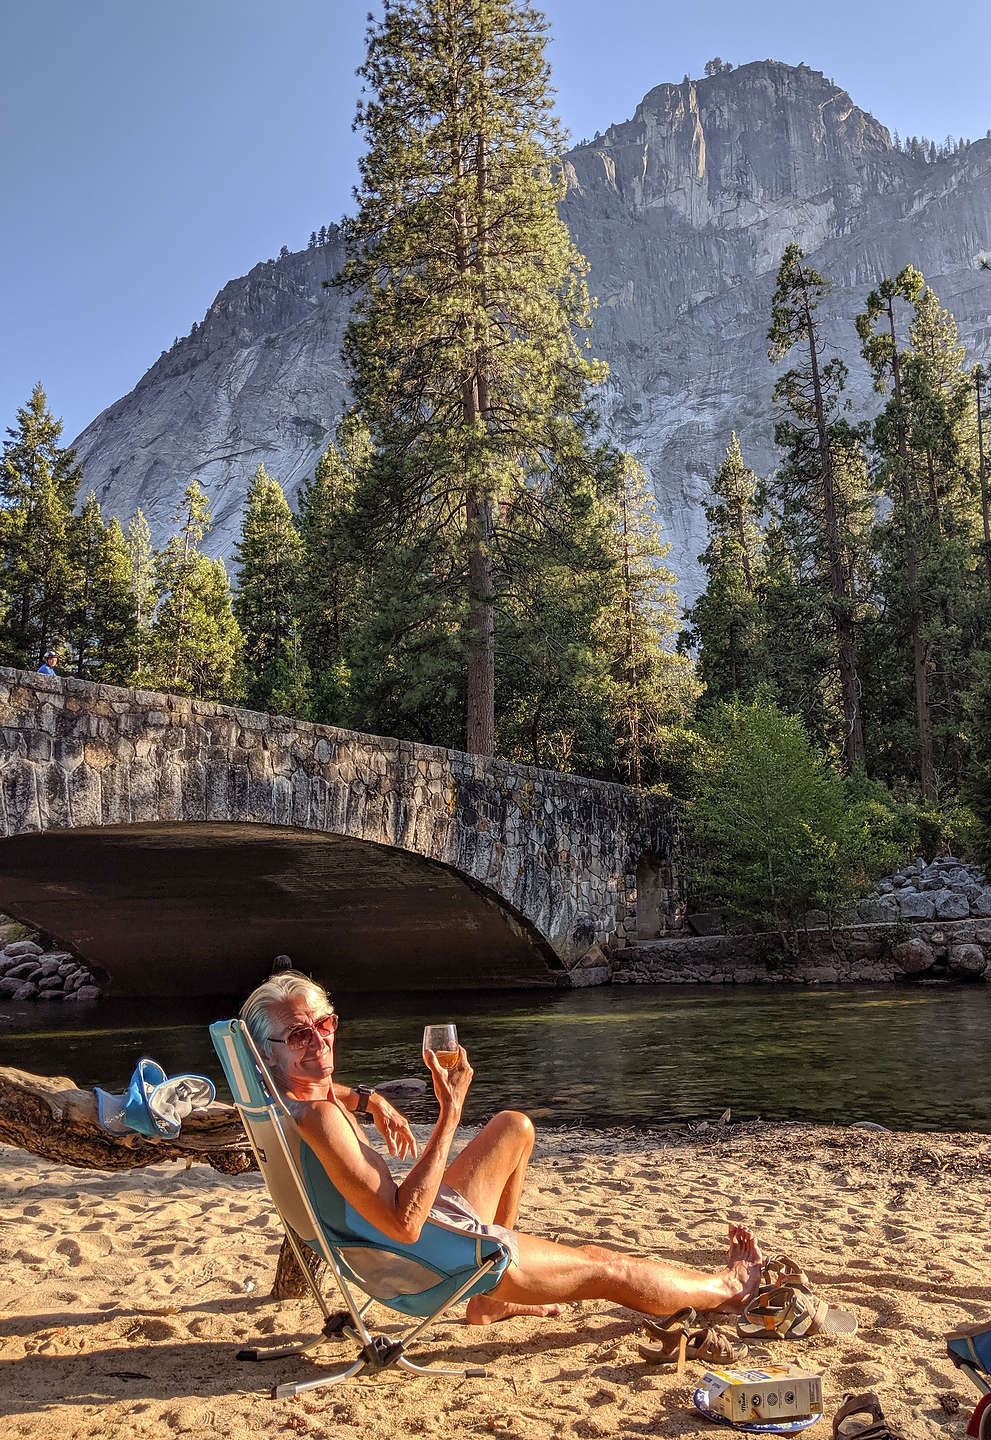 Welcome Toast to another Yosemite Valley adventure